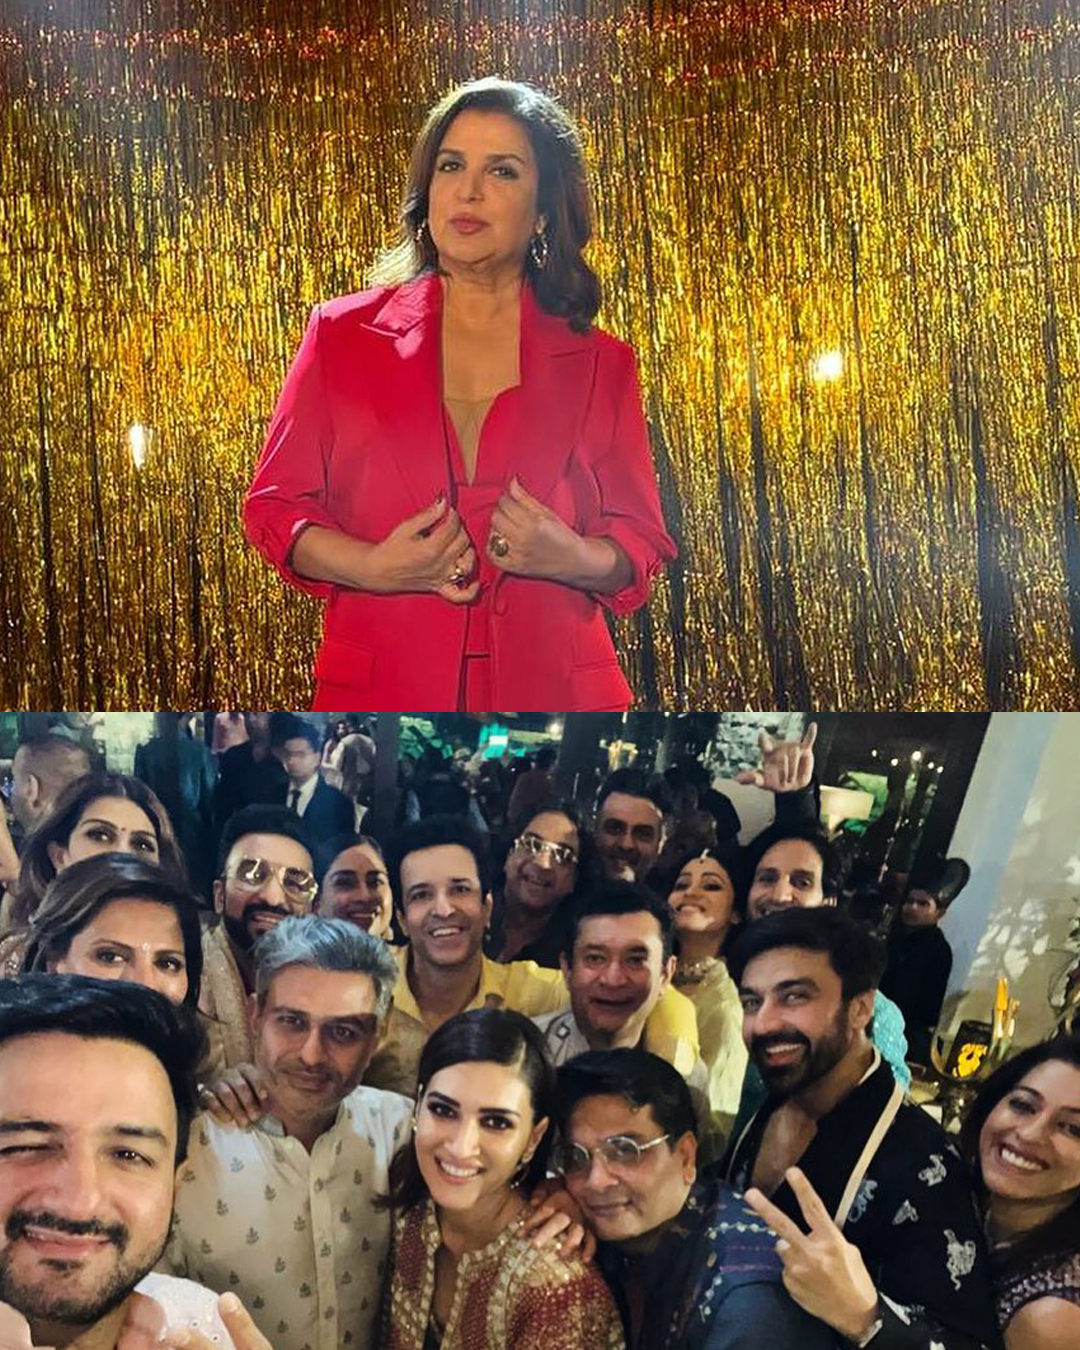 Television Actors Shoaib Ibrahimm, Aamir Ali, Adrija Sinha, And Many Celebrities Participated In The Show Jhalak Dikhhla Jaa 11. It's All Set To Begin On November 11, And Judge Farah Khan Discussed The Significance Of The Show.